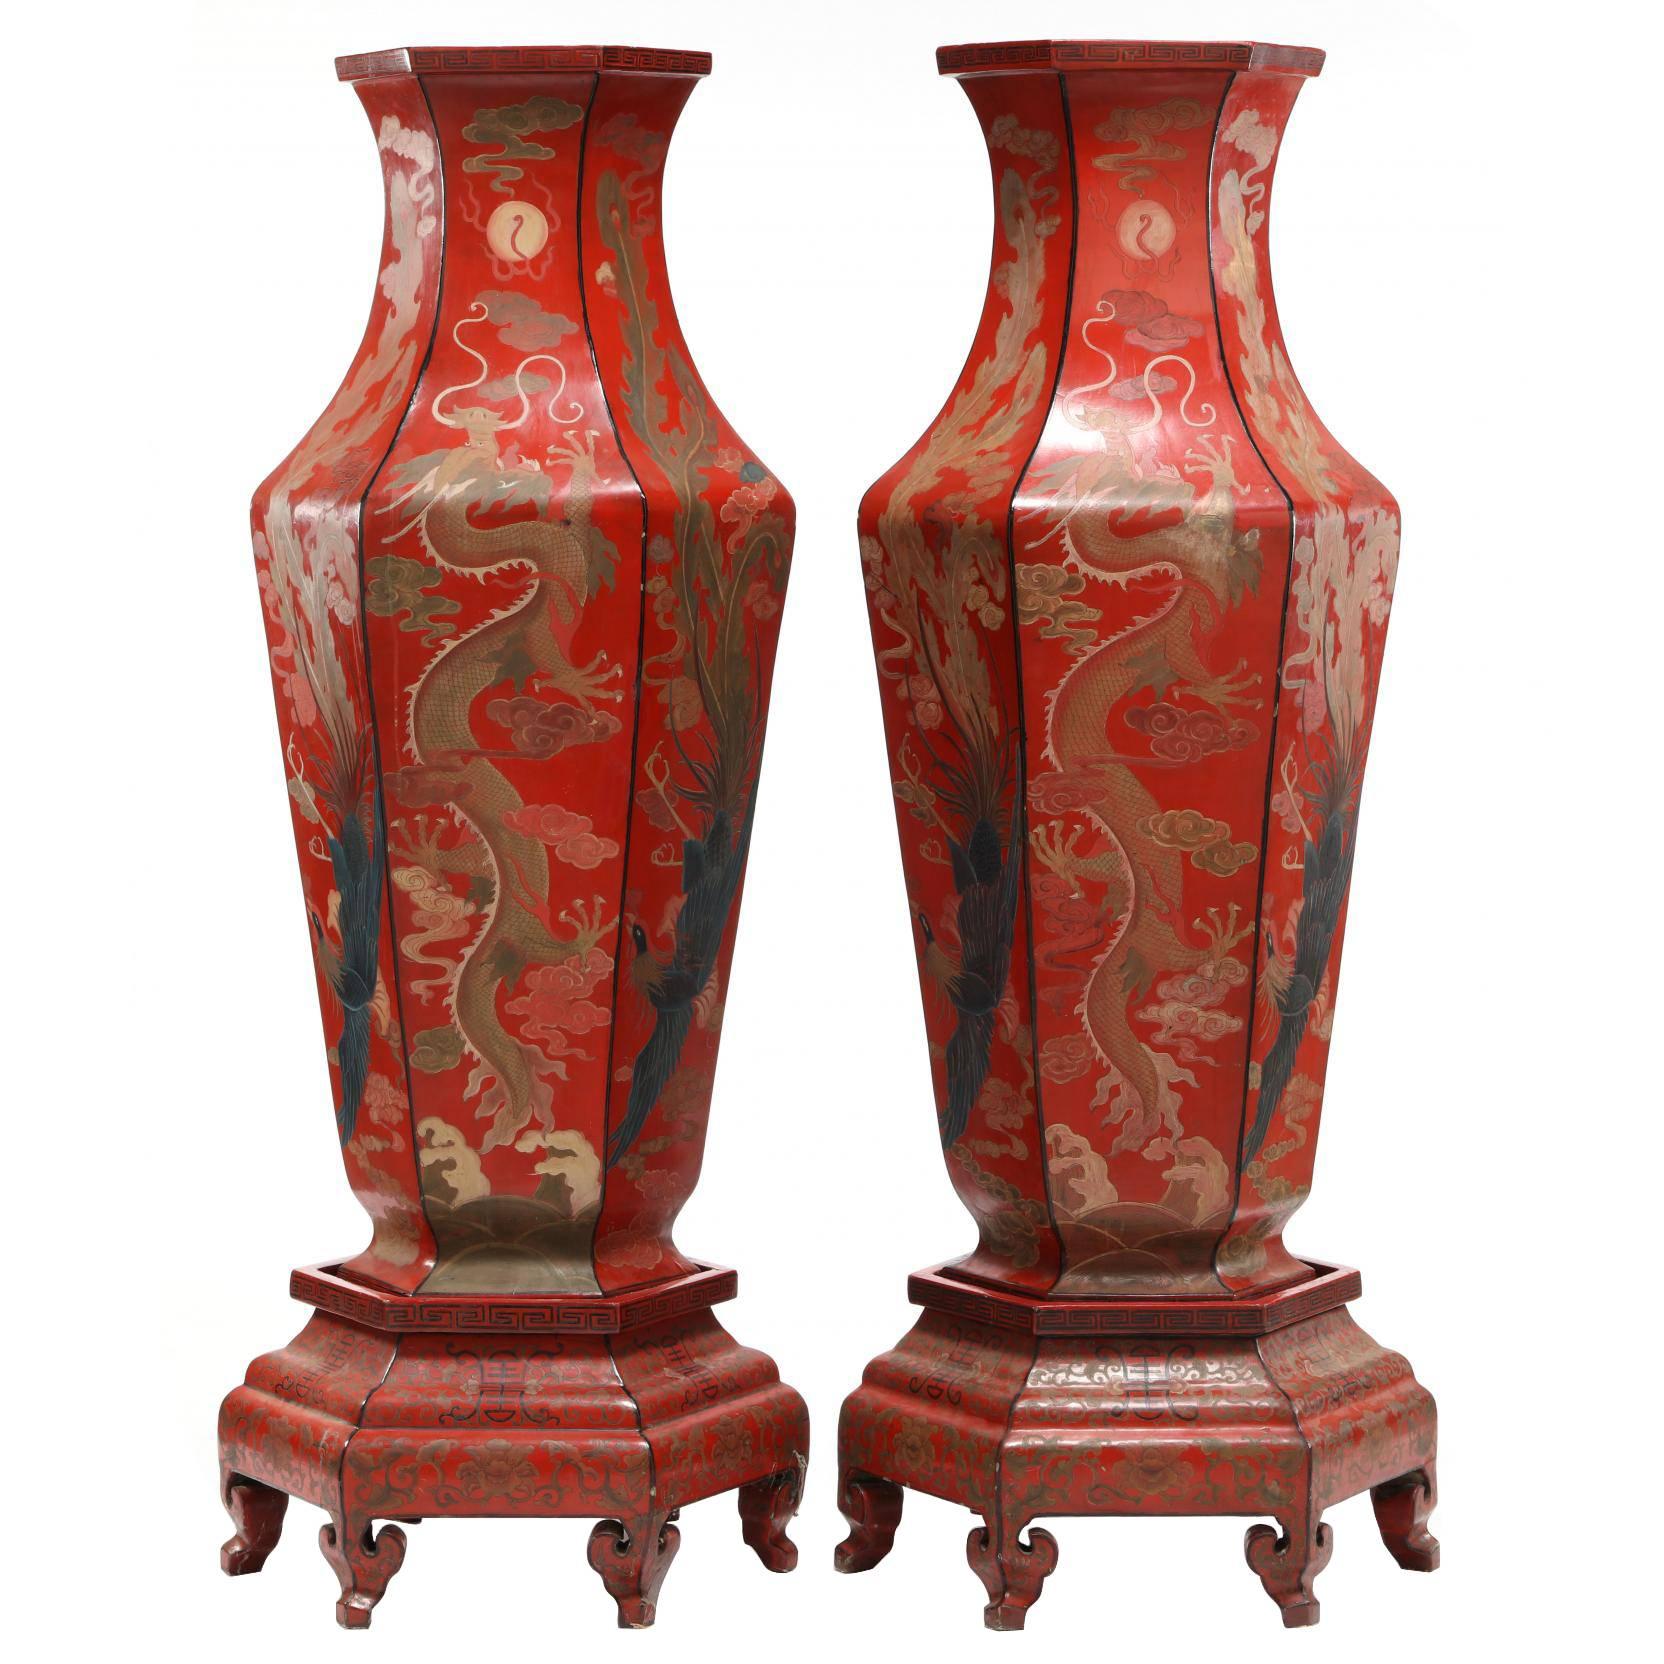 Large Pair of Chinese Red Lacquer Imperial Vases with Painted Dragon on Stands